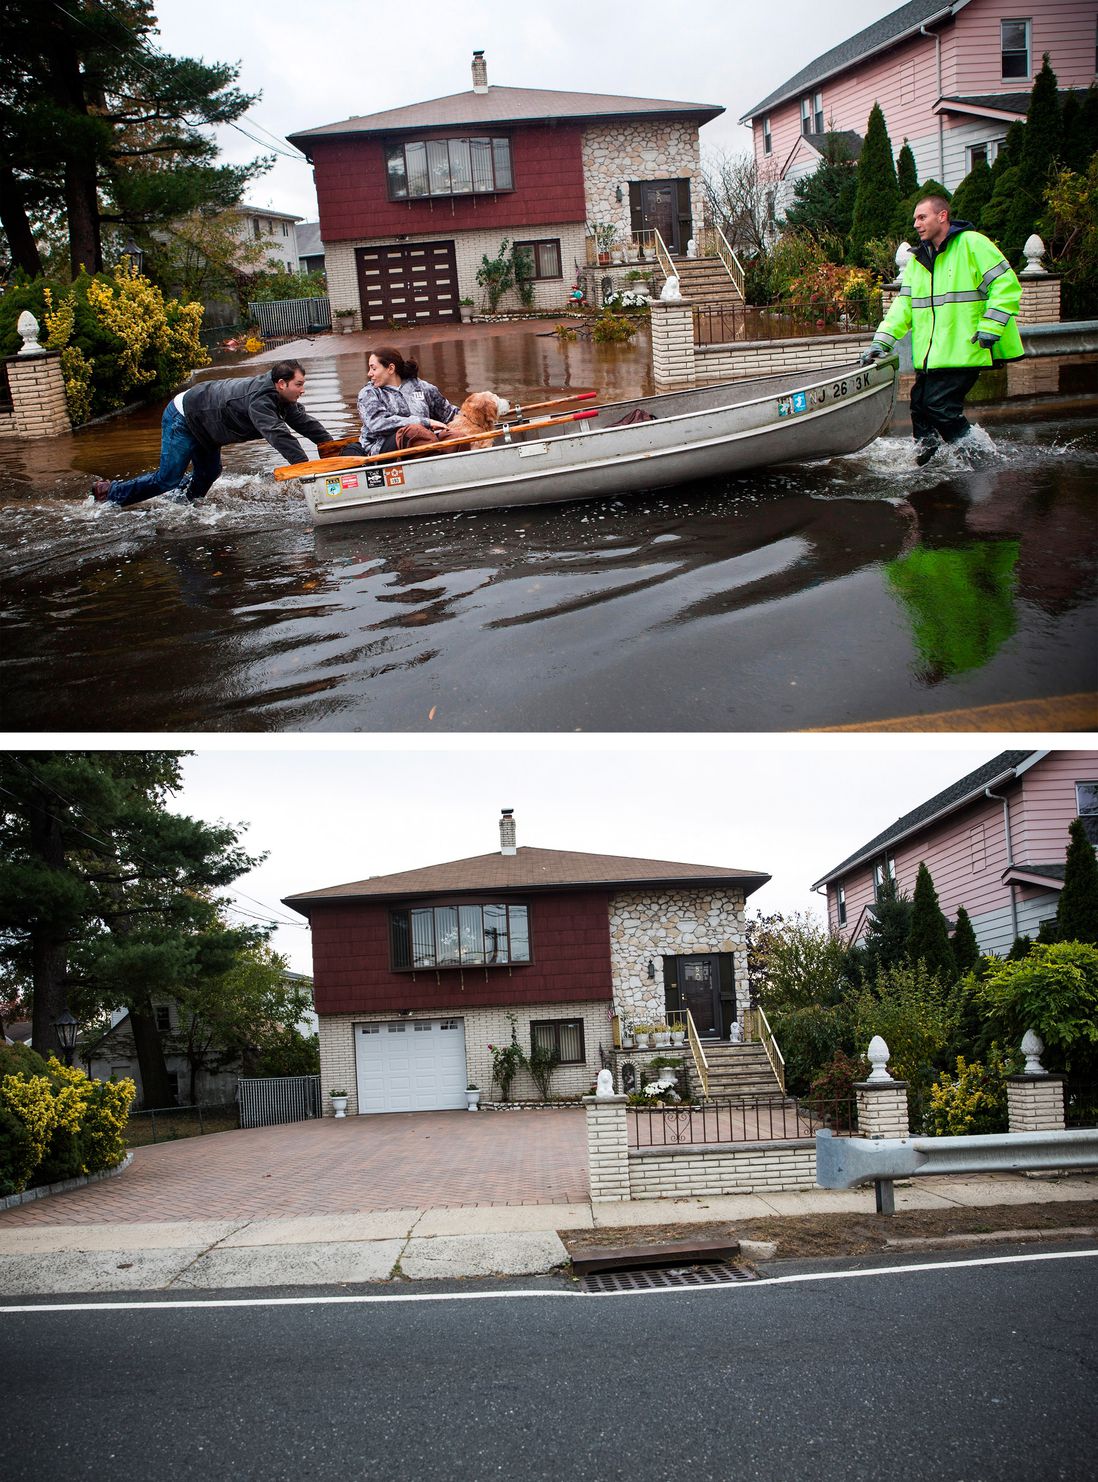 [Top] An emergency responder helps evacuate two people with a boat, after their neighborhood experienced flooding due to Superstorm Sandy October 30, 2012 in Little Ferry, New Jersey. [Bottom] The same home in Little Ferry, NJ is shown October 22, 2013.